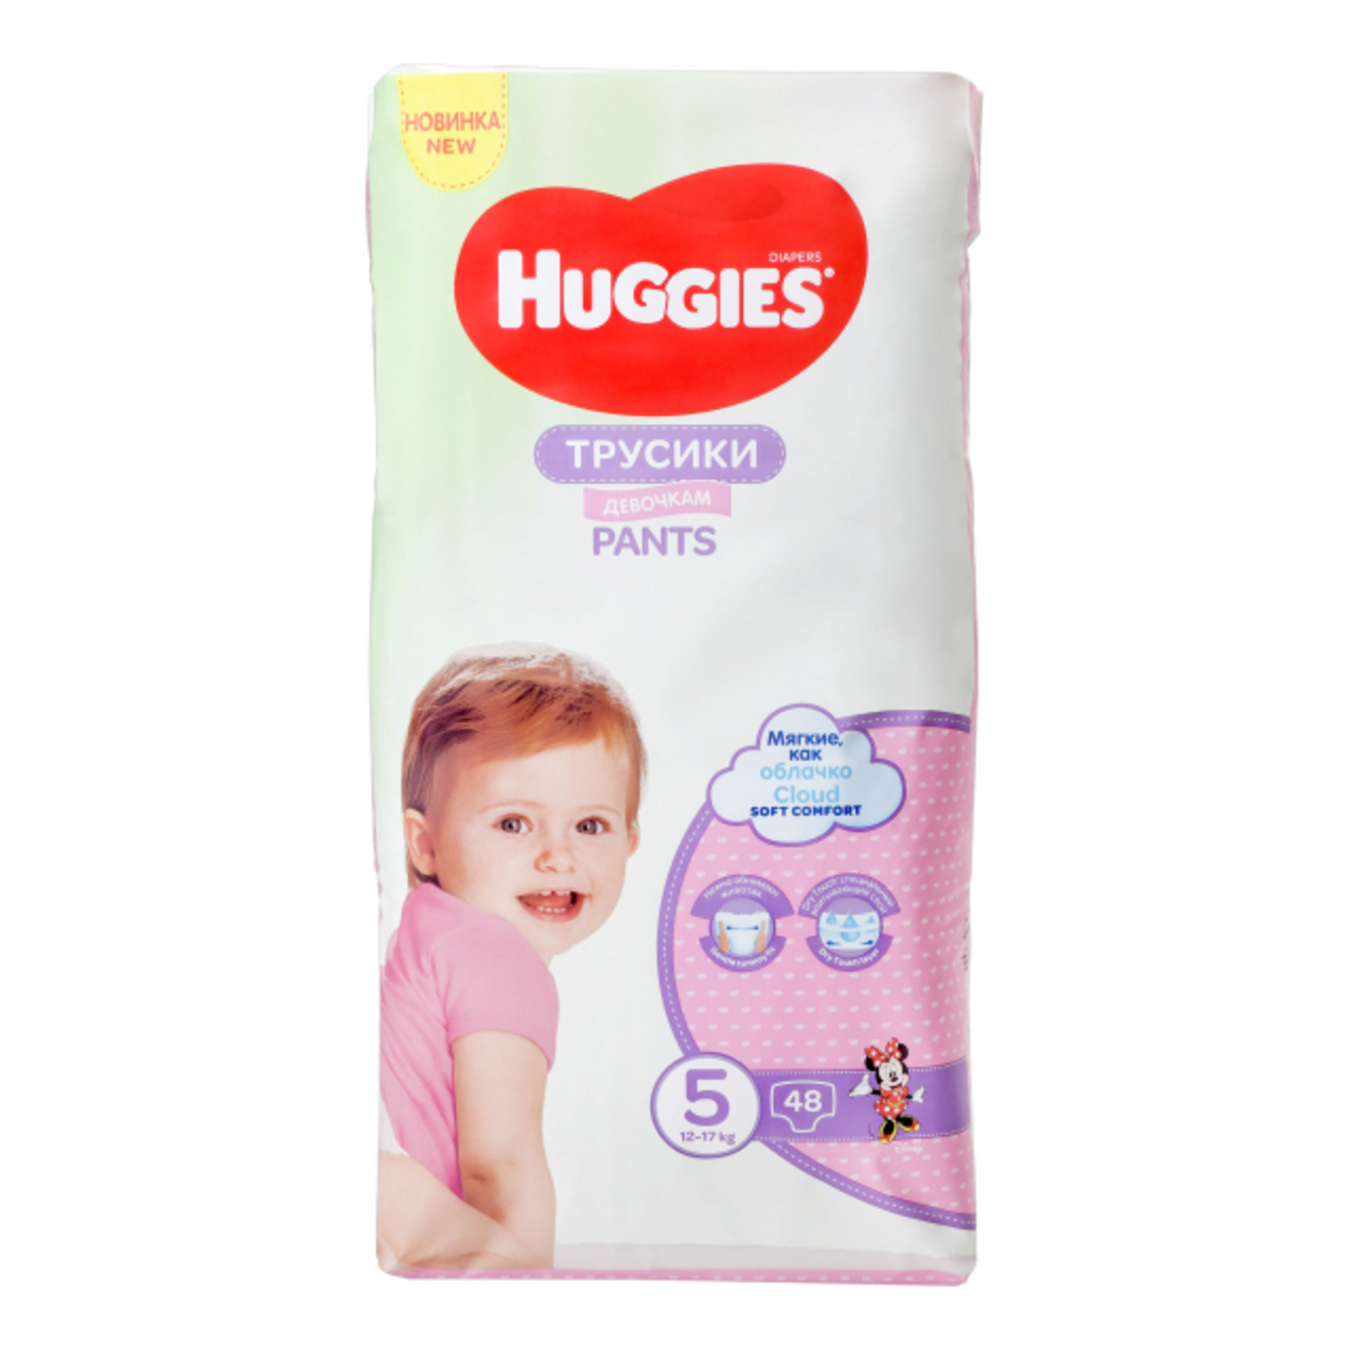 labyrinth gallery Muscular Huggies Pants 5 Mega Panties-diapers 13-17 kg for Girls 48pcs ᐈ Buy at a  good price from Novus